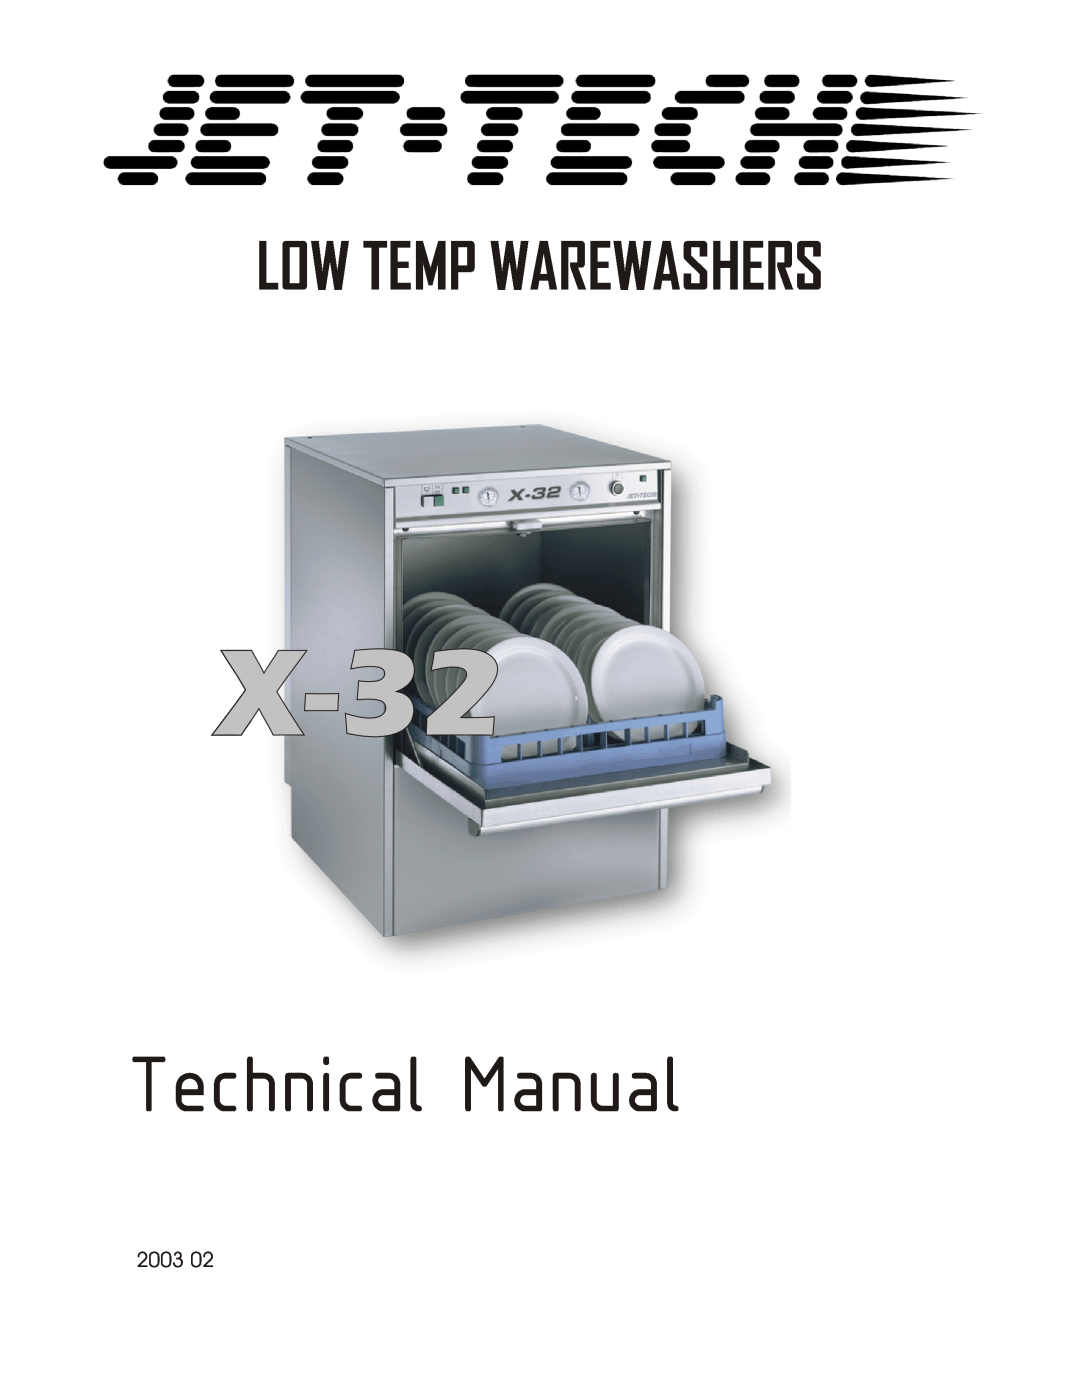 Jettech Metal Products X-32 technical manual Technical Manual, Low Temp Warewashers 